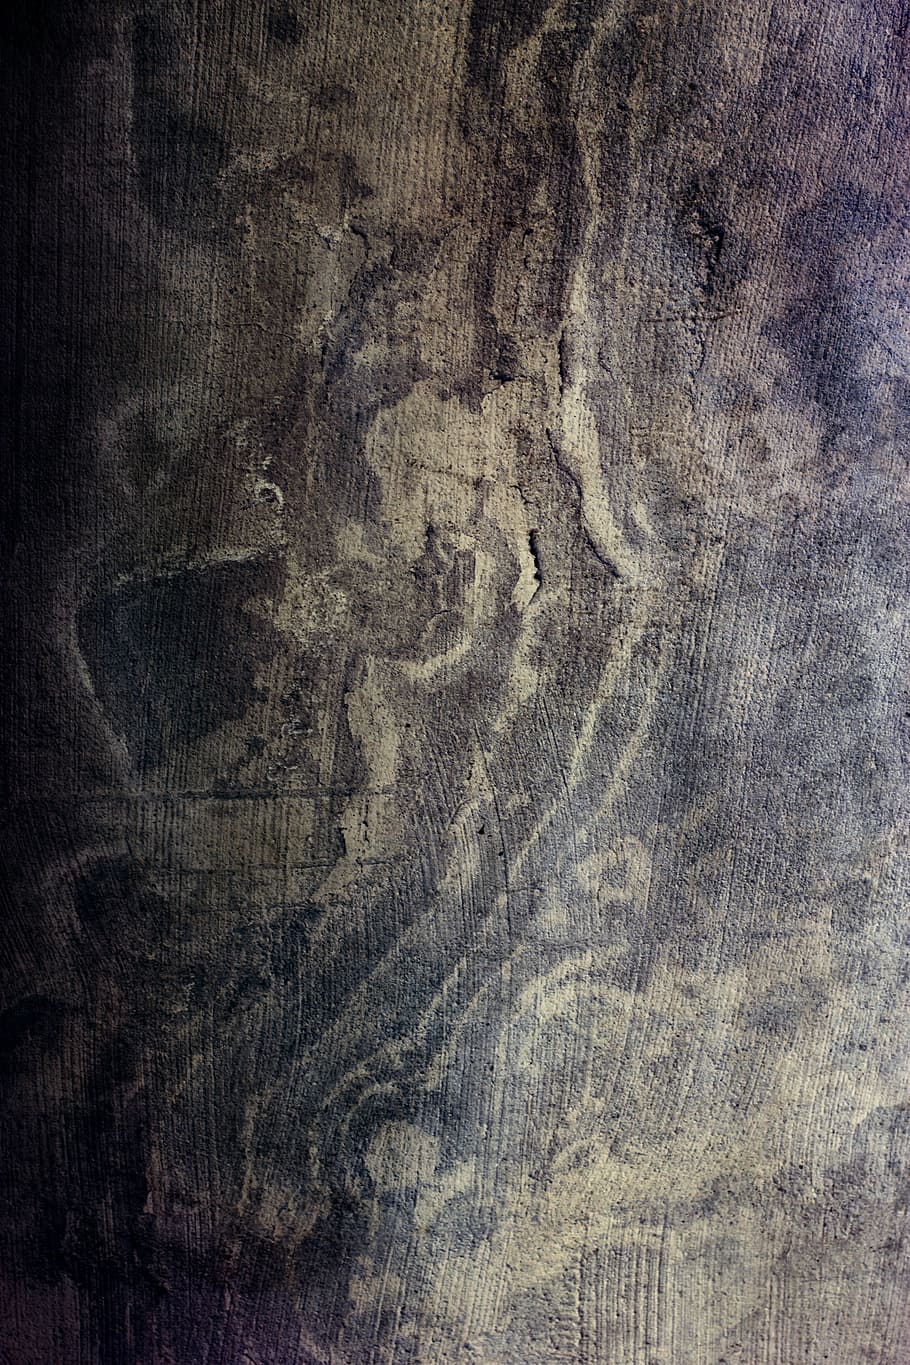 untitled, grunge, dark, texture, textured, backgrounds, material, close-up, pattern, textile